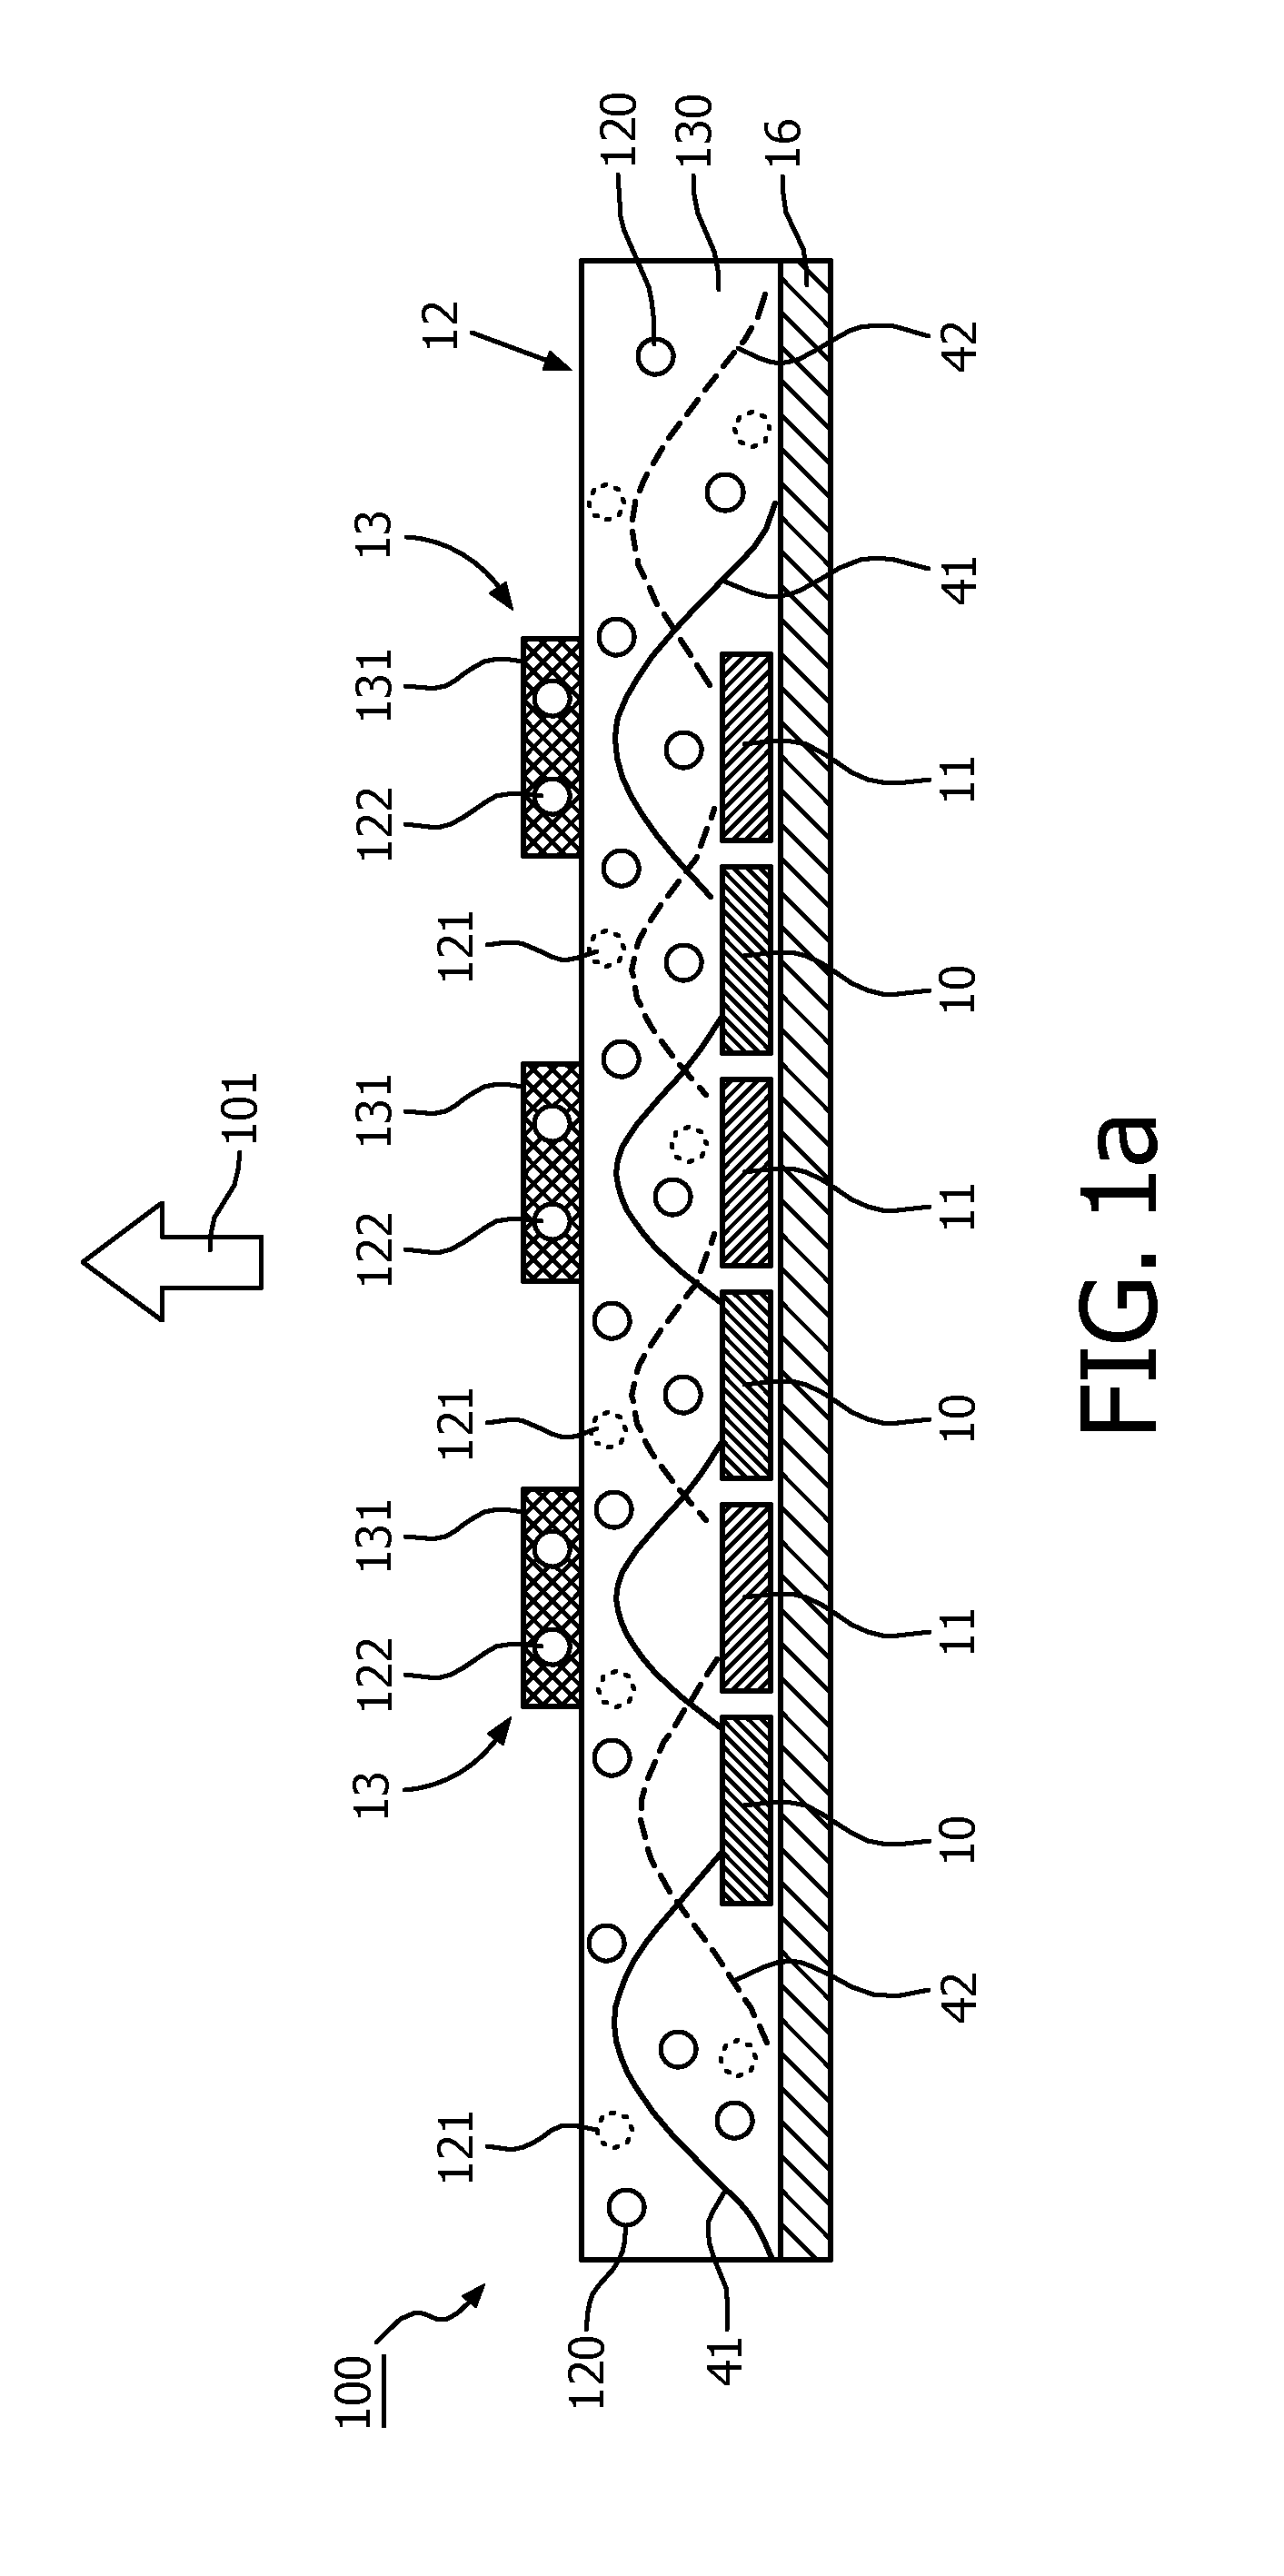 Lighting device comprising at least two sets of LEDs